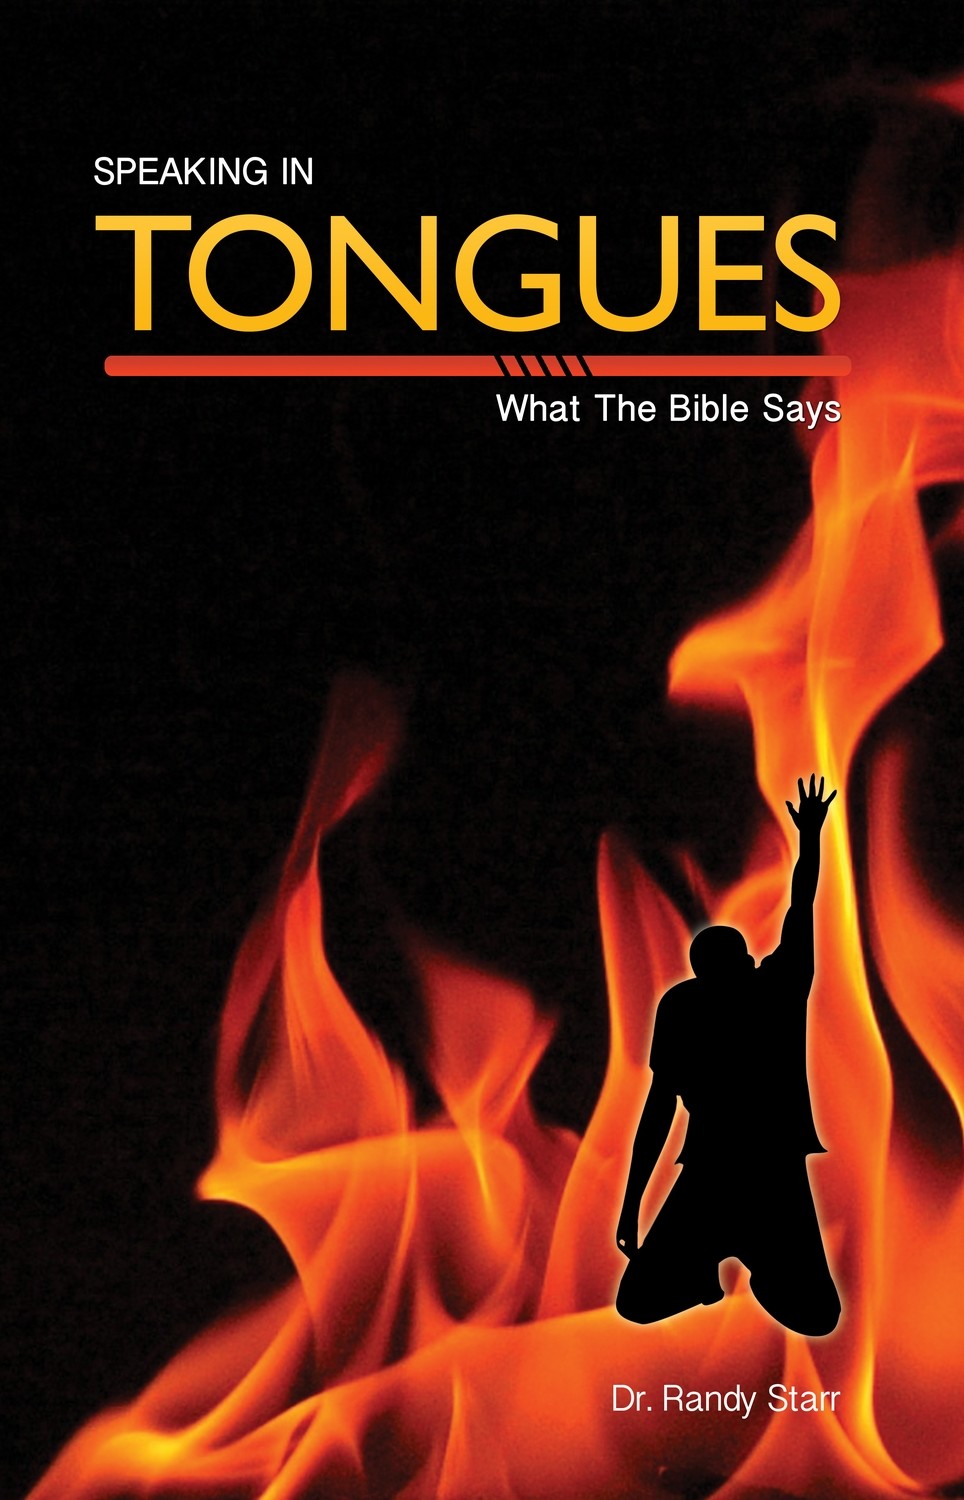 Speaking in Tongues - Bible Answer Series, volume 5